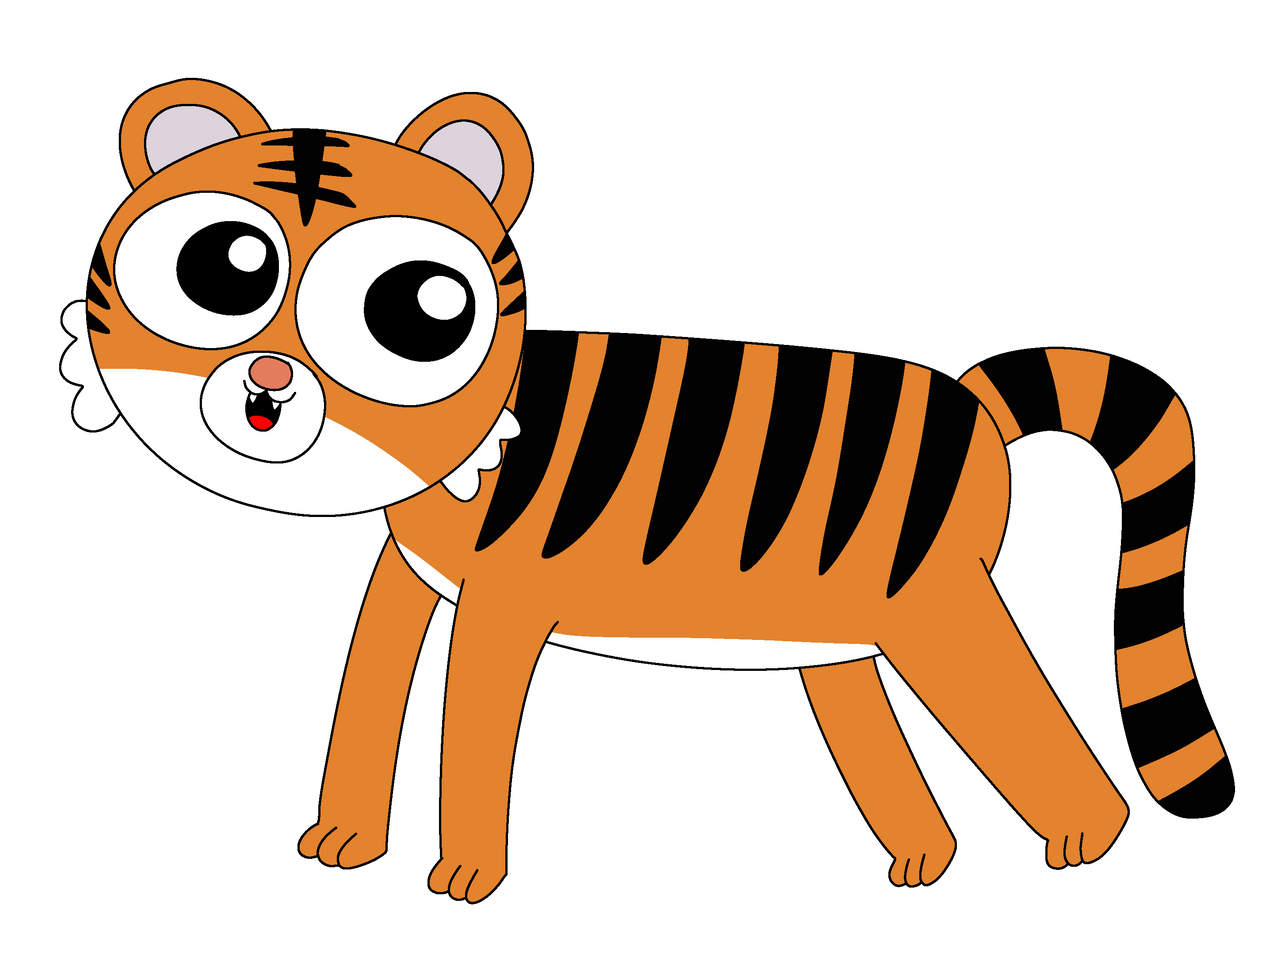 BAC Character: Tom the Tiger by Awesomesuzy11 on DeviantArt